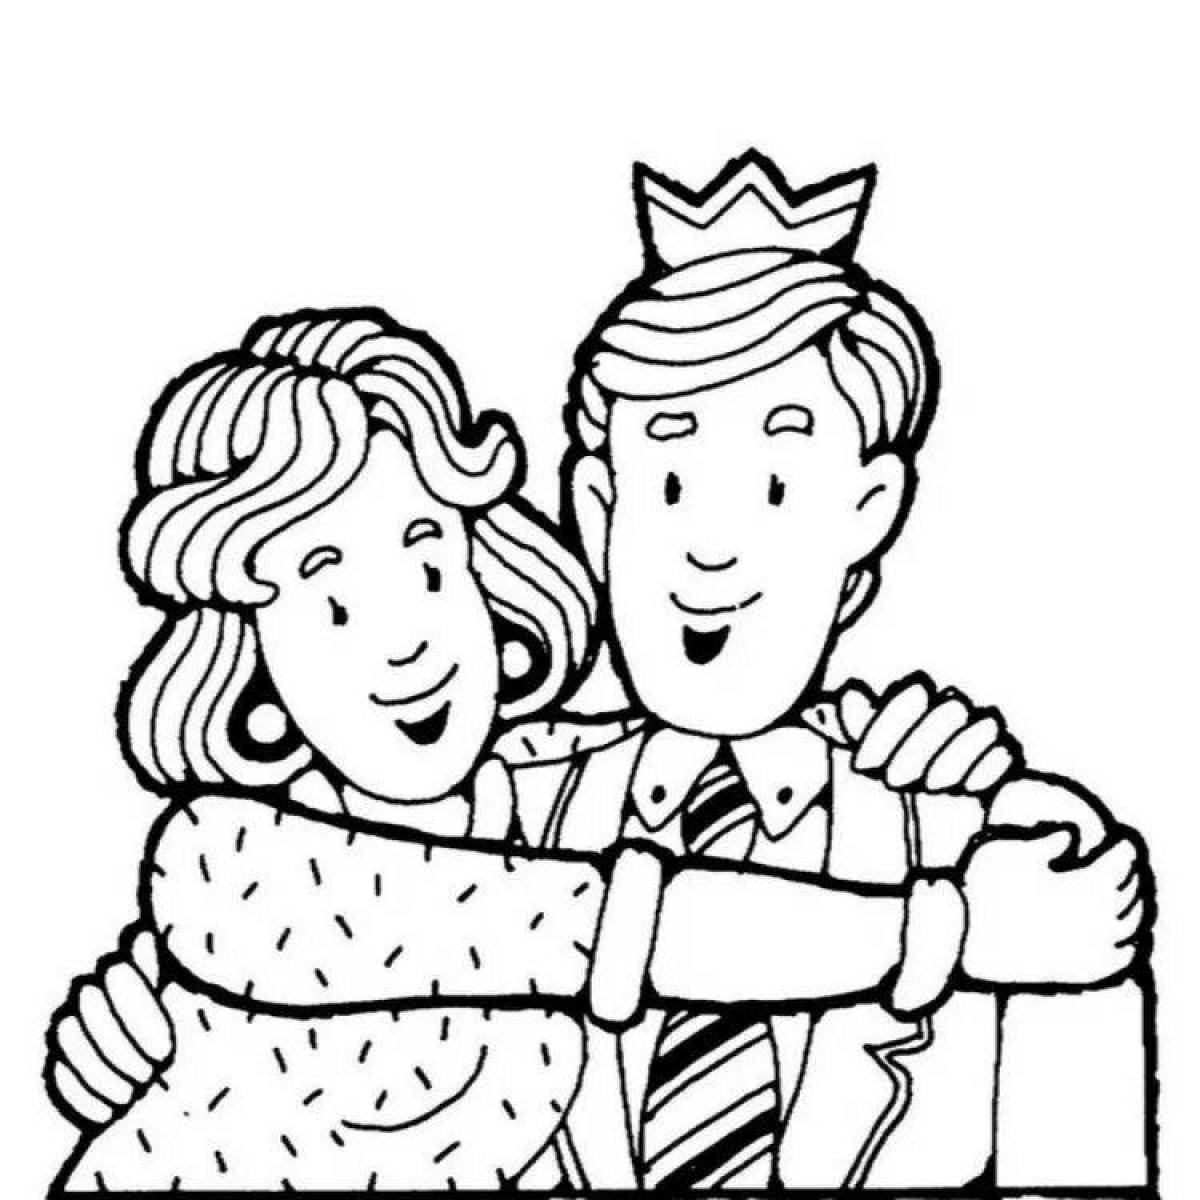 Coloring page caring wife and husband